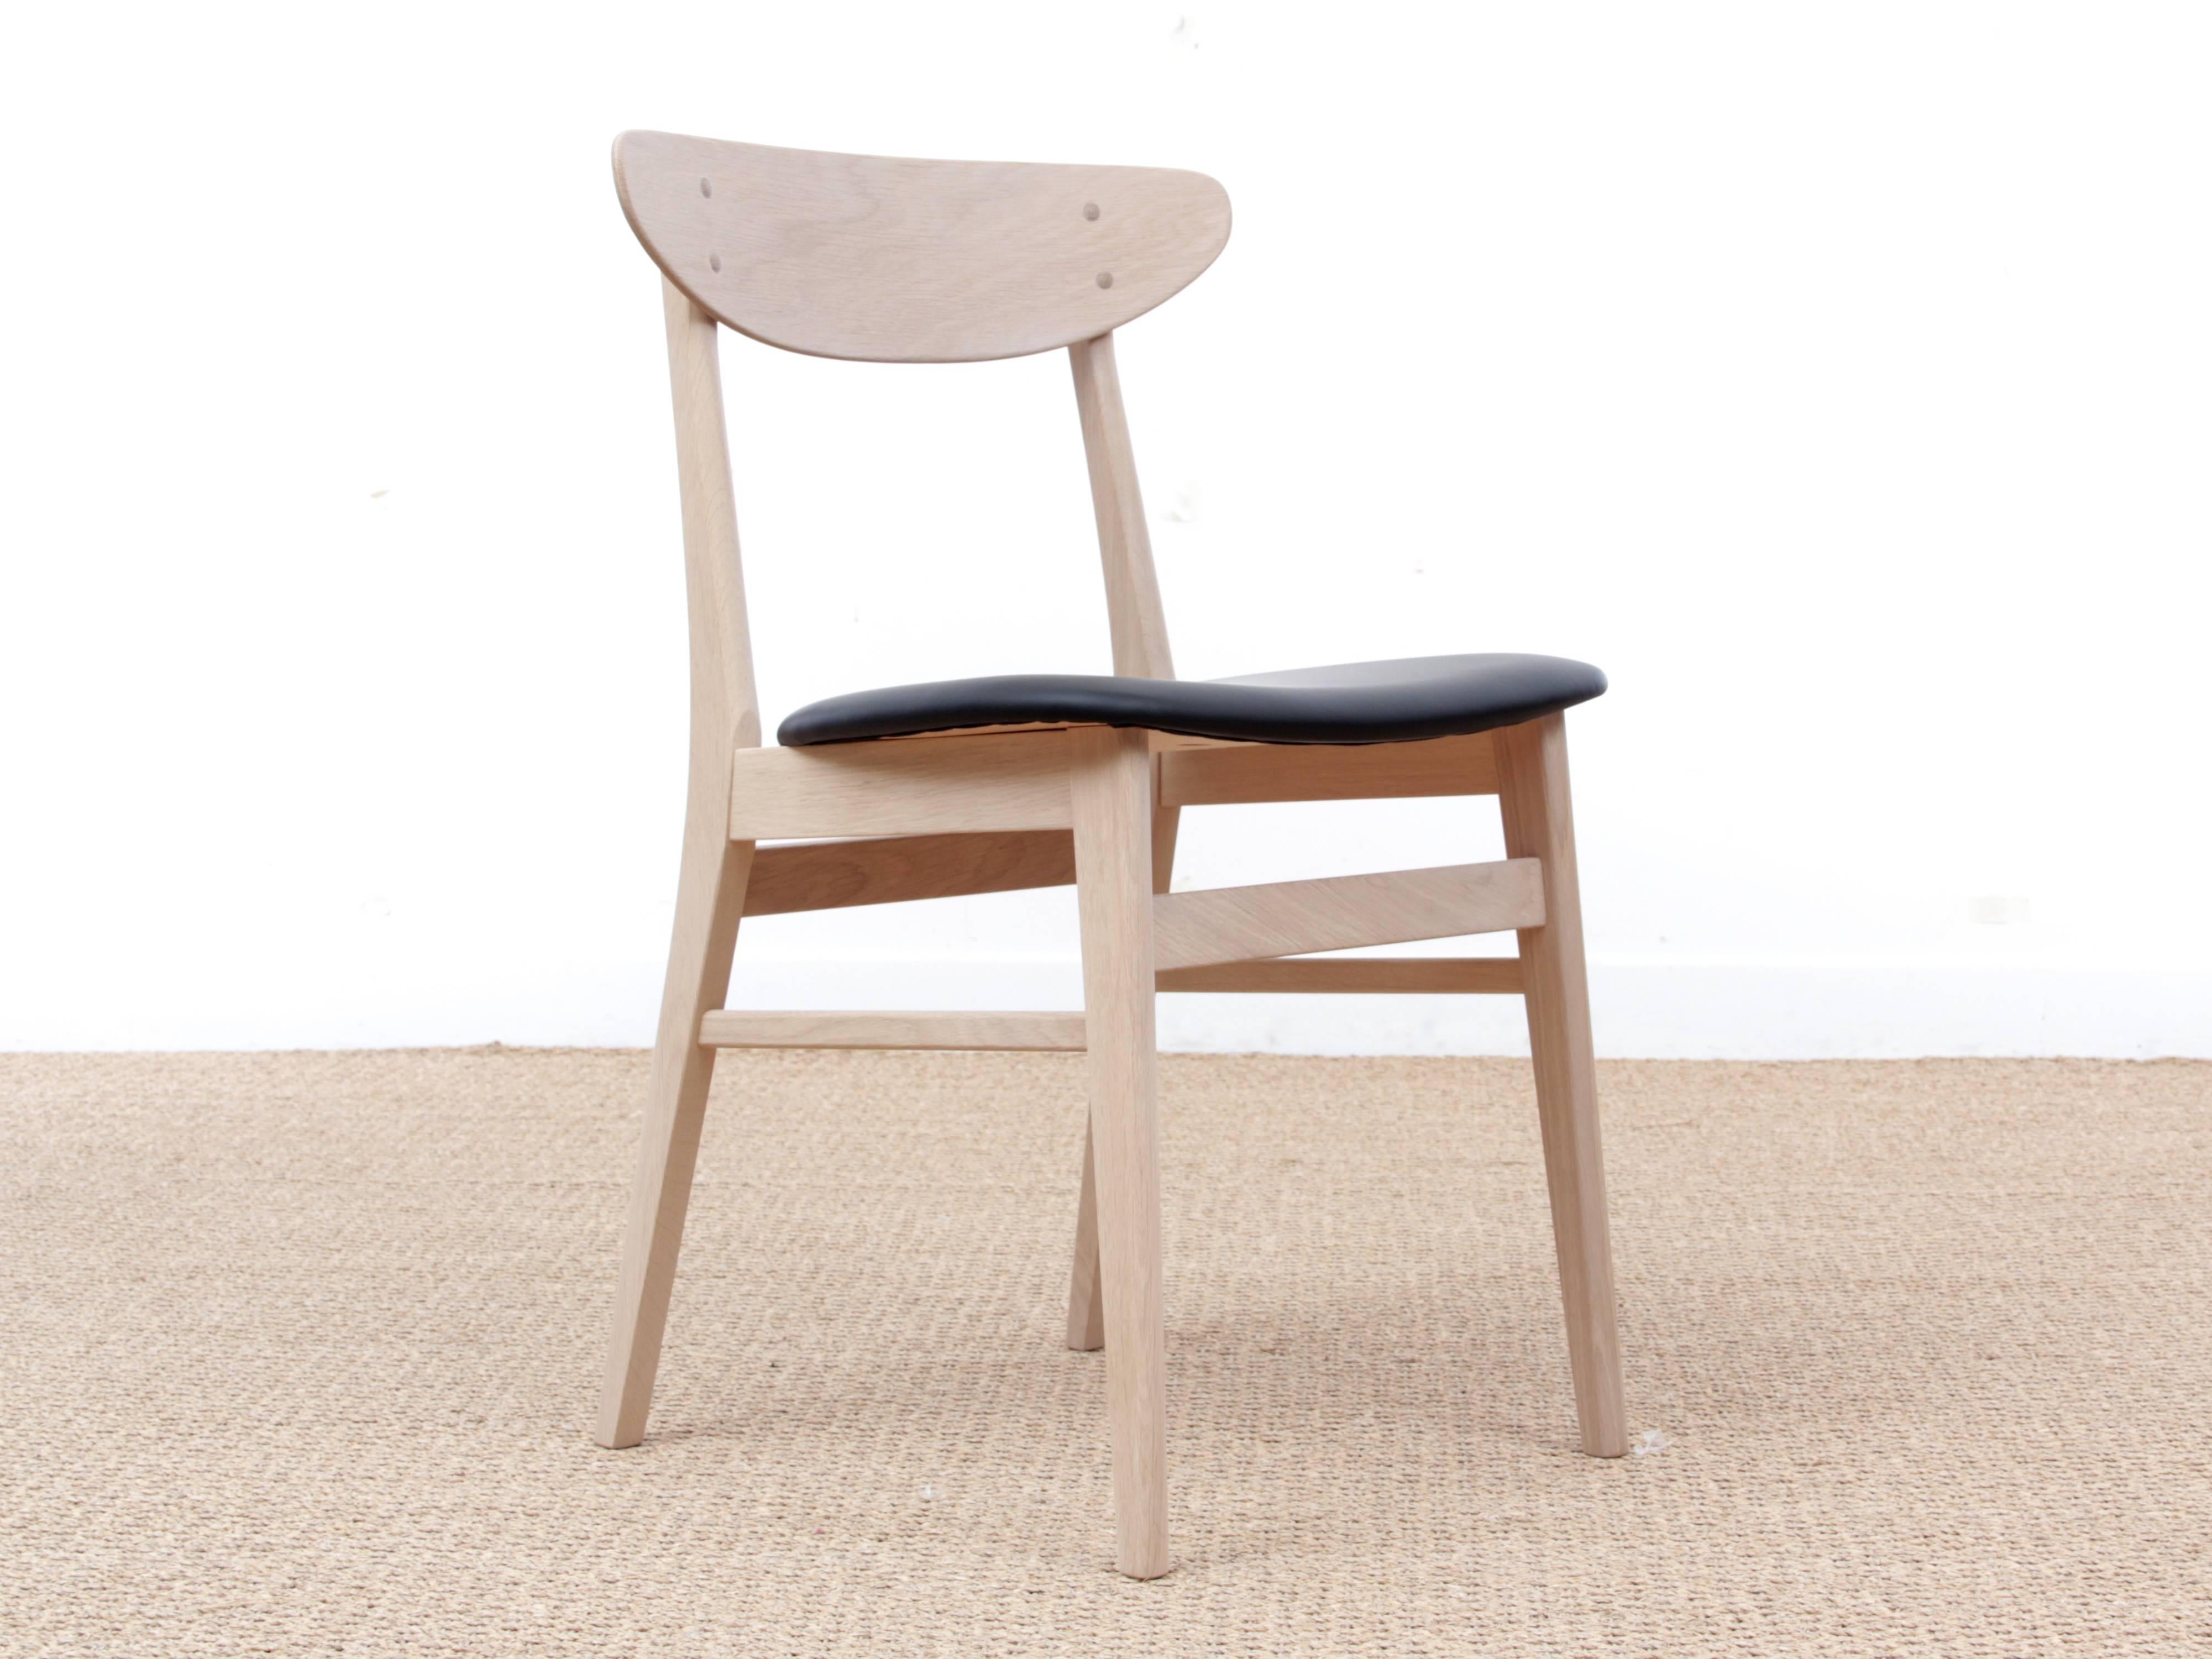 Mid-Century Modern Scandinavian 210 r chair by Thomas Harlev. Solid white oiled oak. Seat available in fabric or leather. Samples on demand.
Architect Thomas Harlev belonged to a group of Danish furniture designers, who designed exclusive and